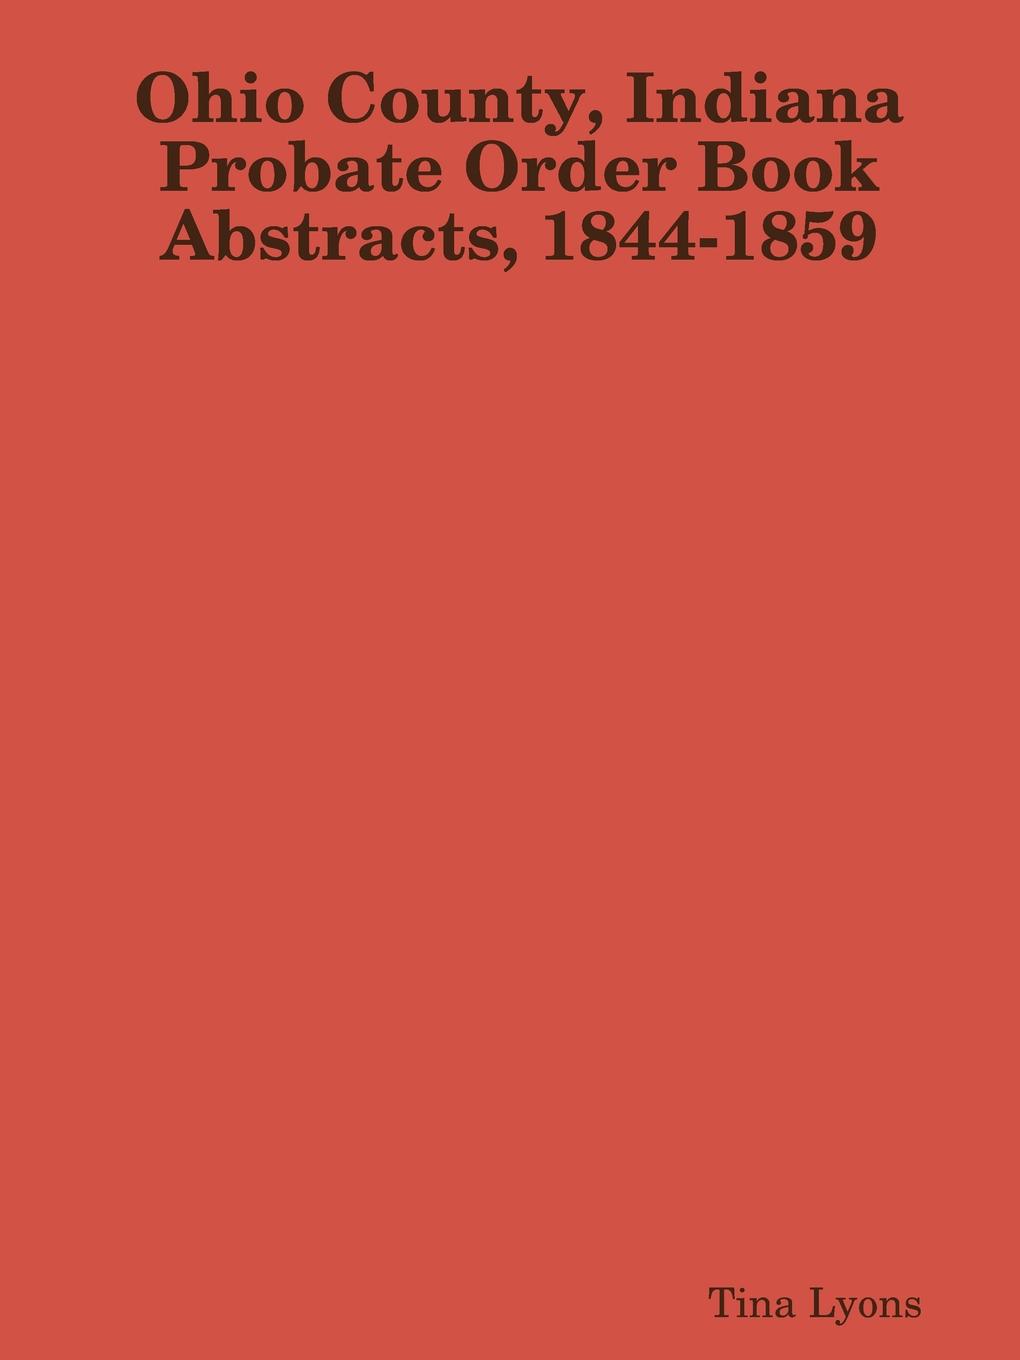 Ohio County, Indiana Probate Order Book Abstracts, 1844-1859